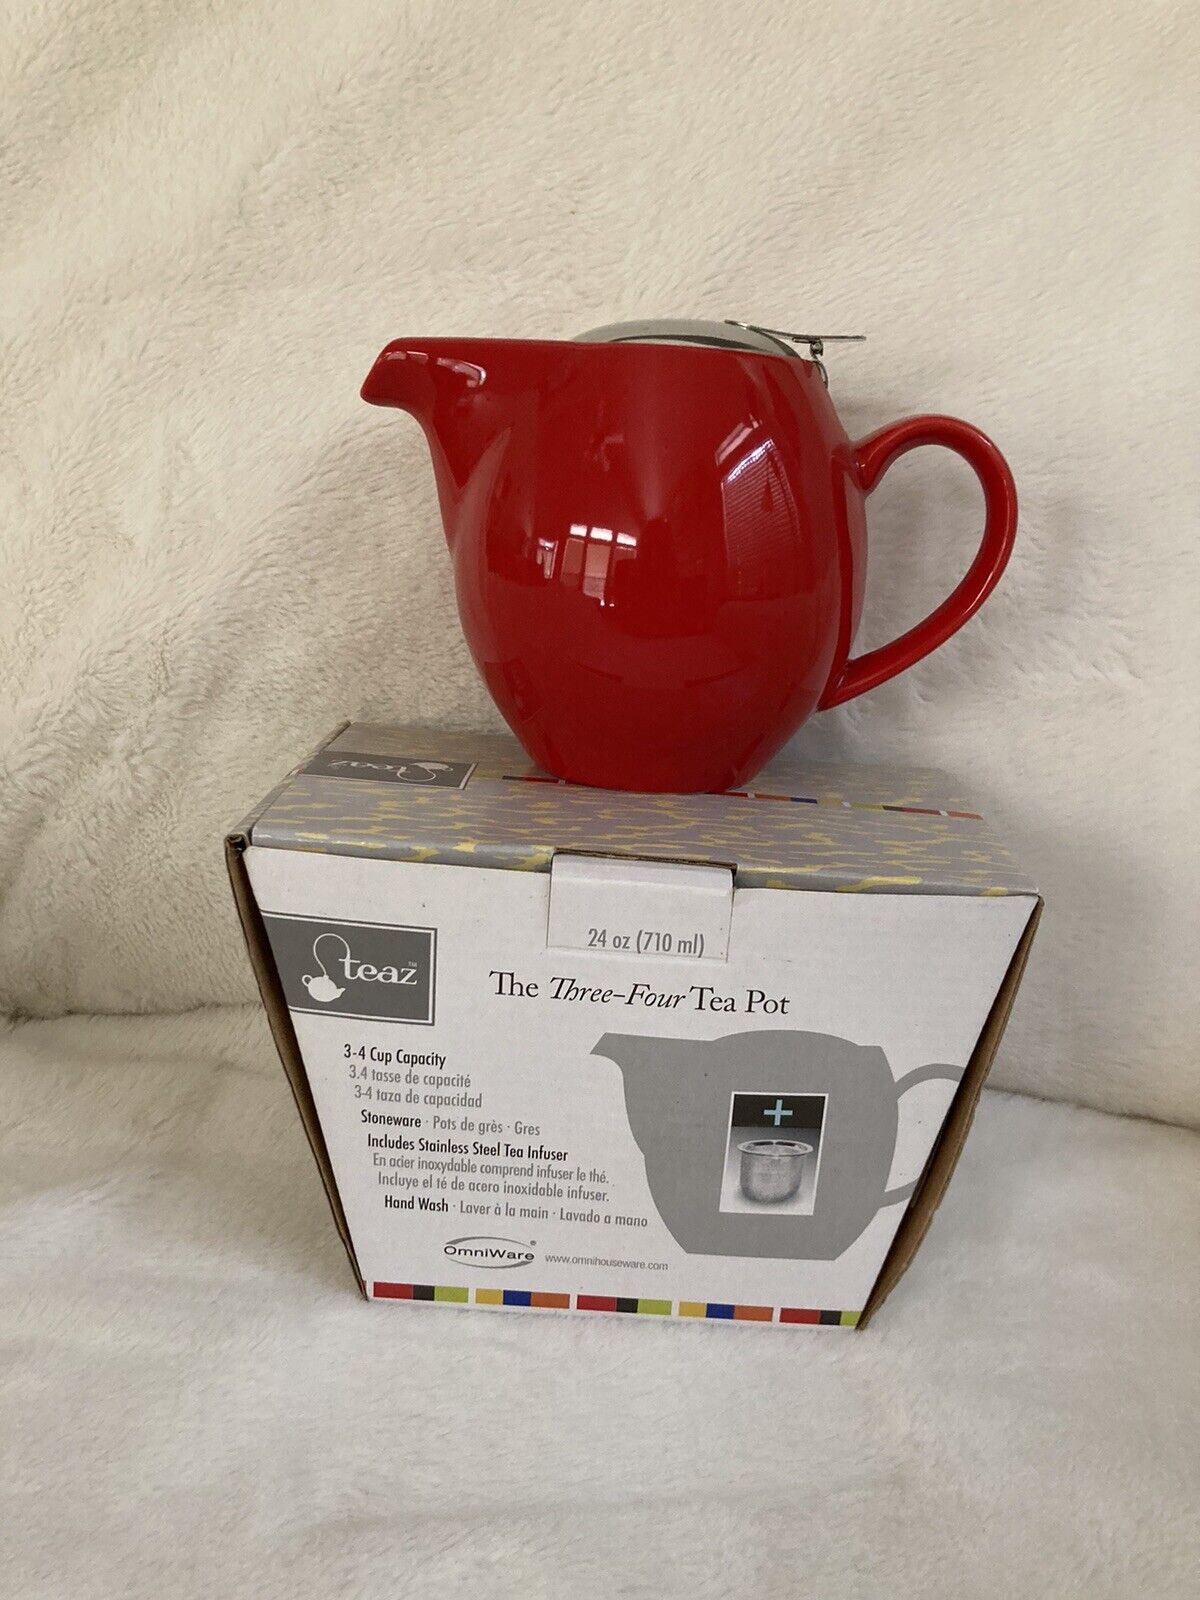 OmniWare Teaz Red Infuser Ceramic 24 Ounce Teapot with Stainless Steel New